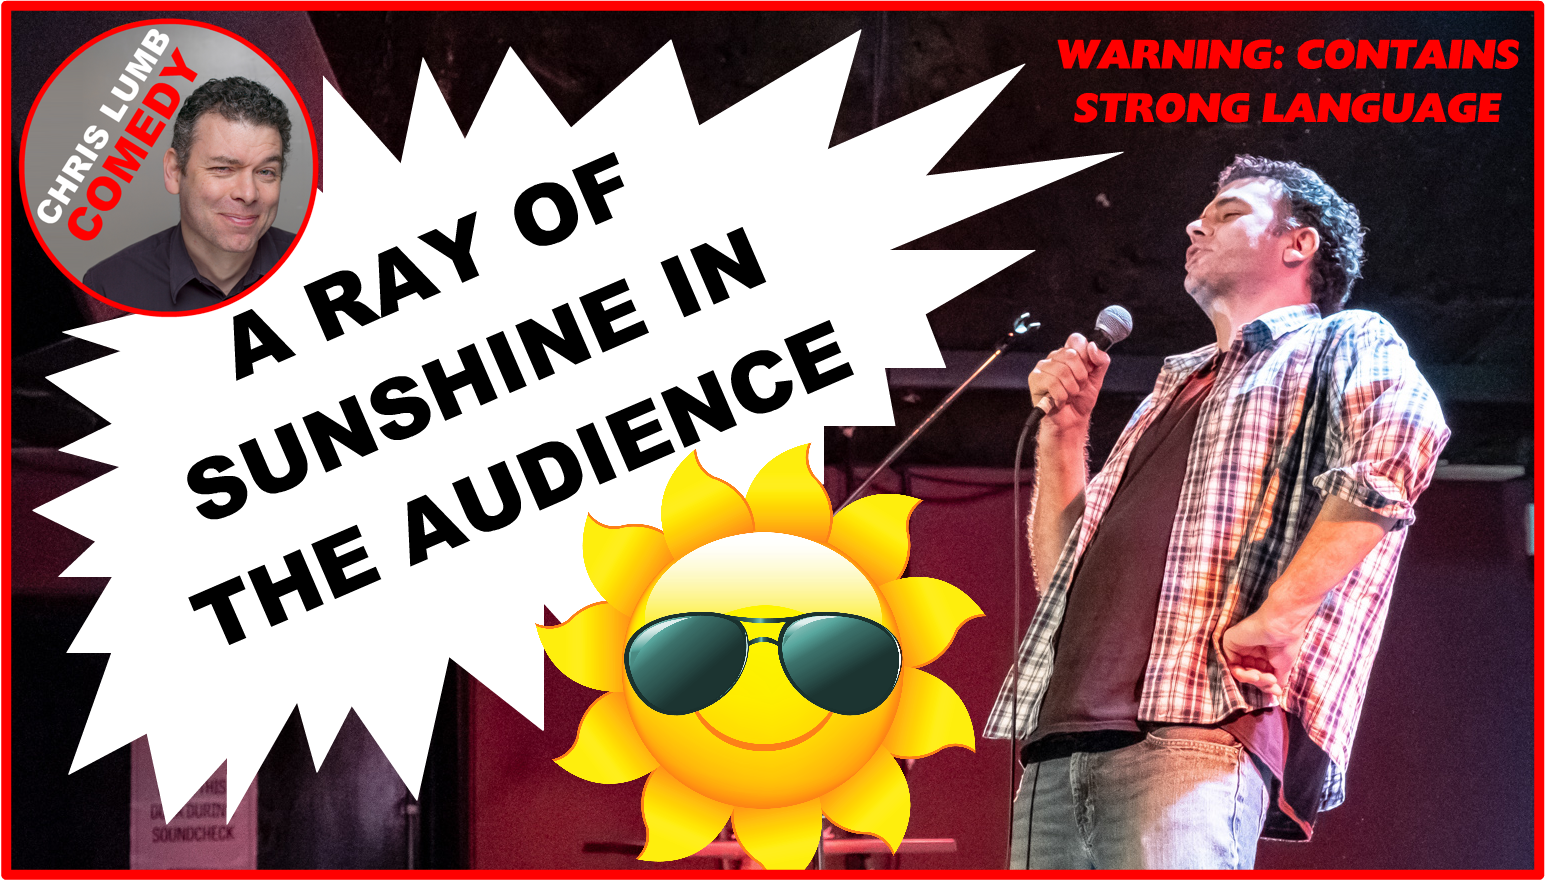 Chris Lumb Comedy "A Ray of Sunshine in the Audience"